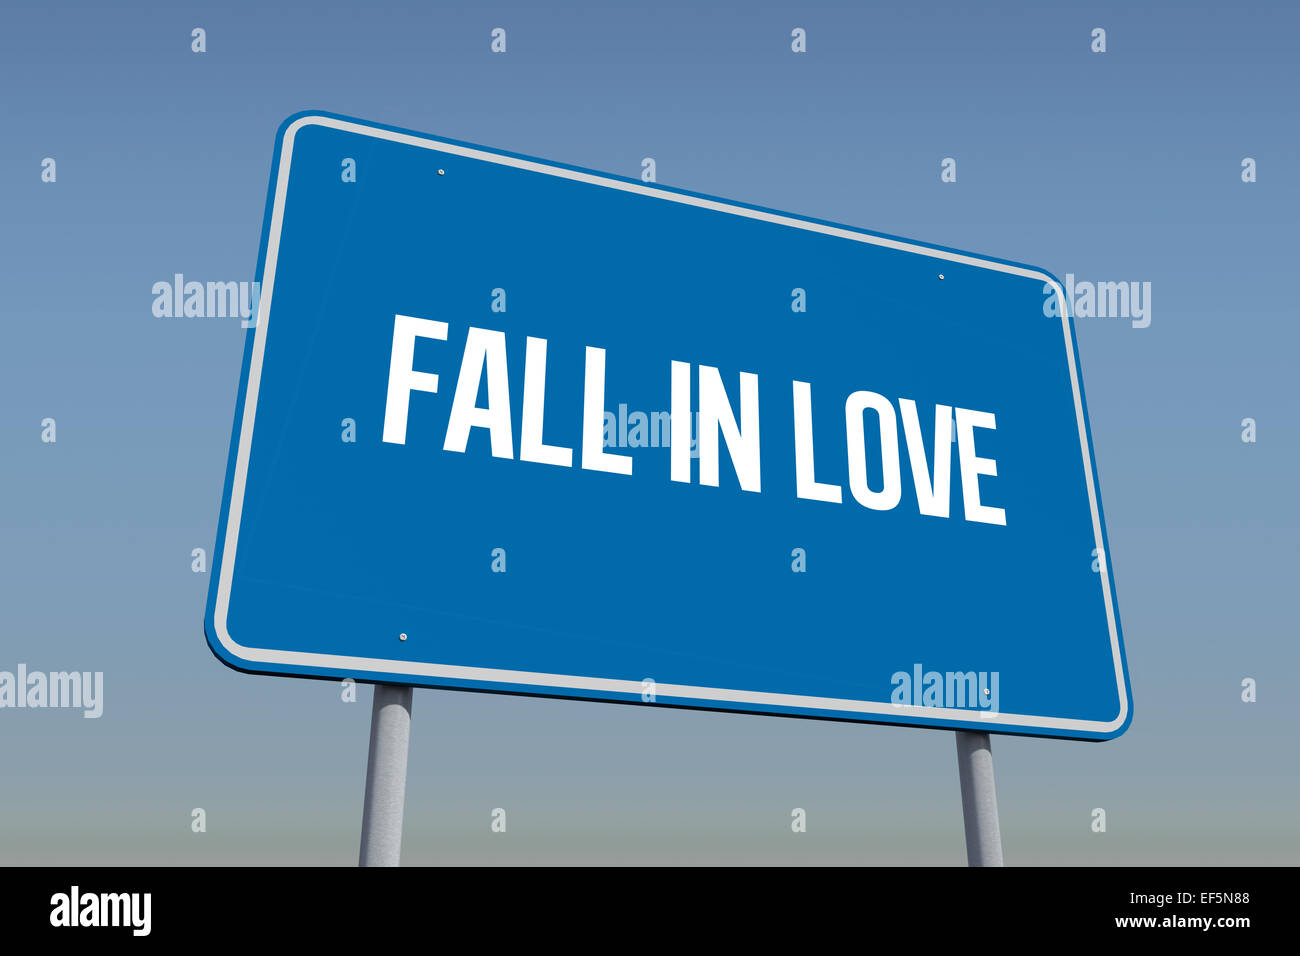 Fall in love against blue sky Stock Photo